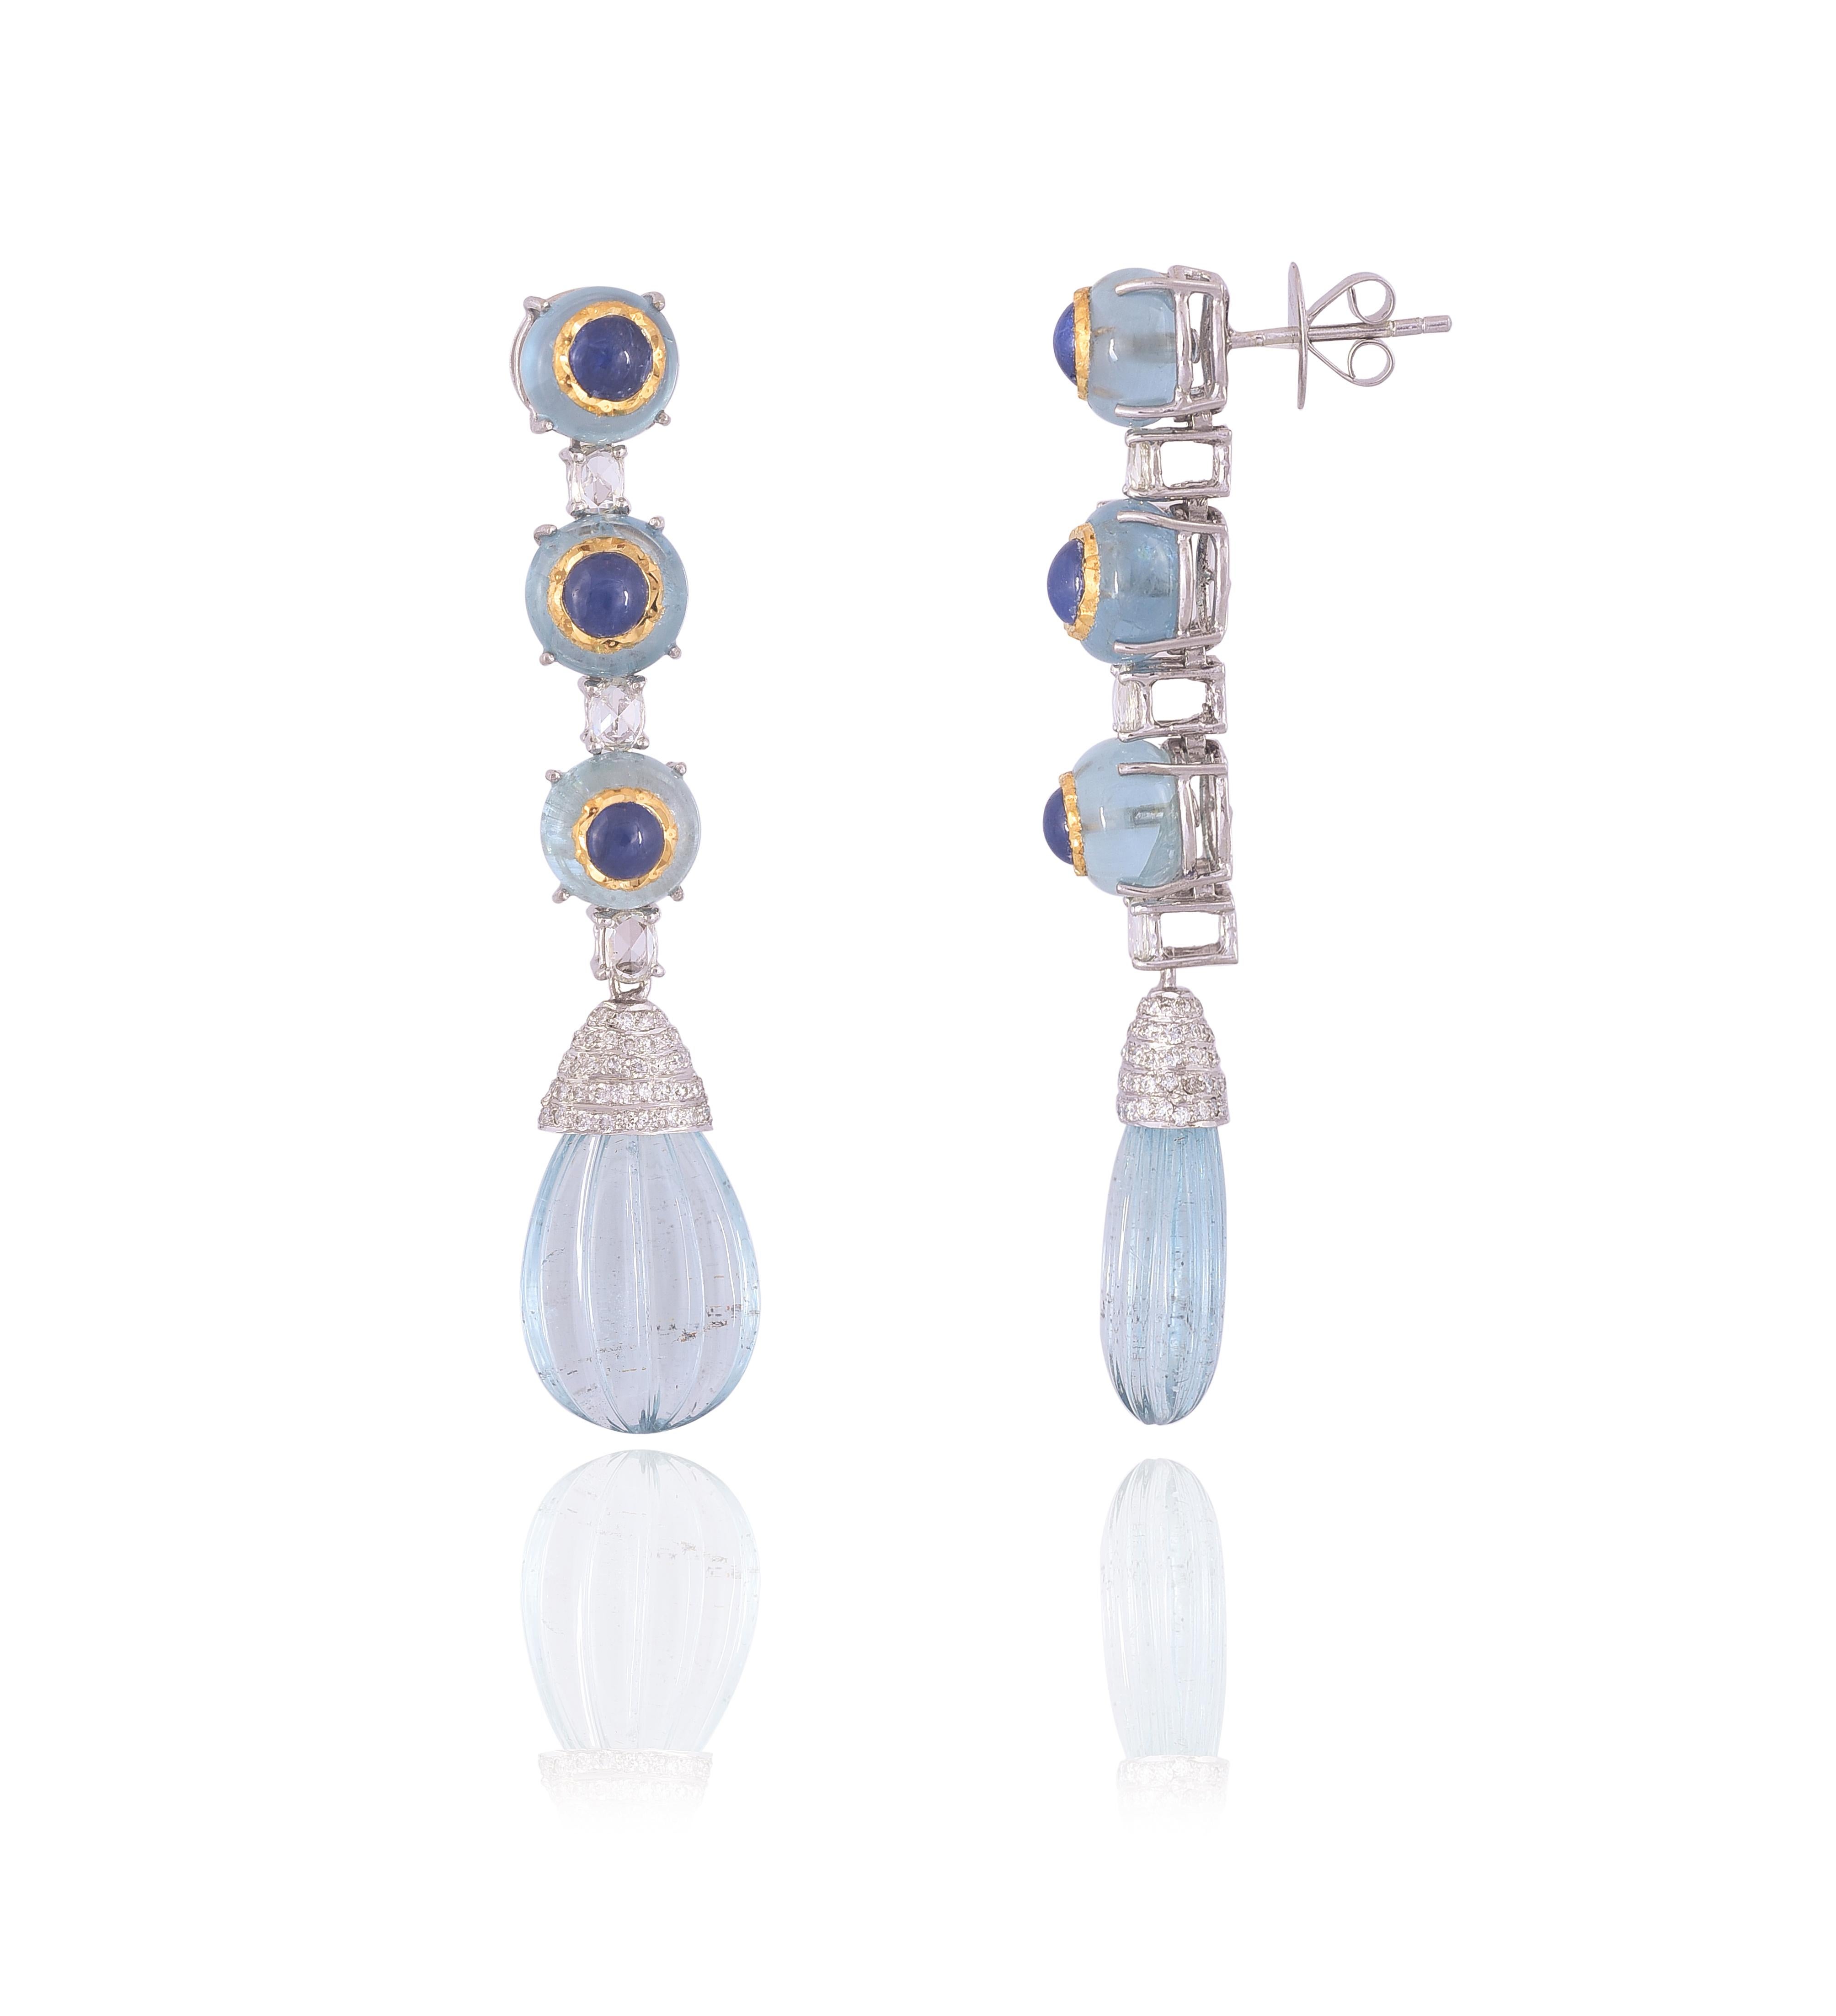 Art Deco Set in 18K Gold, Blue Sapphire In-Laid with Aquamarine Drop Chandelier Earrings